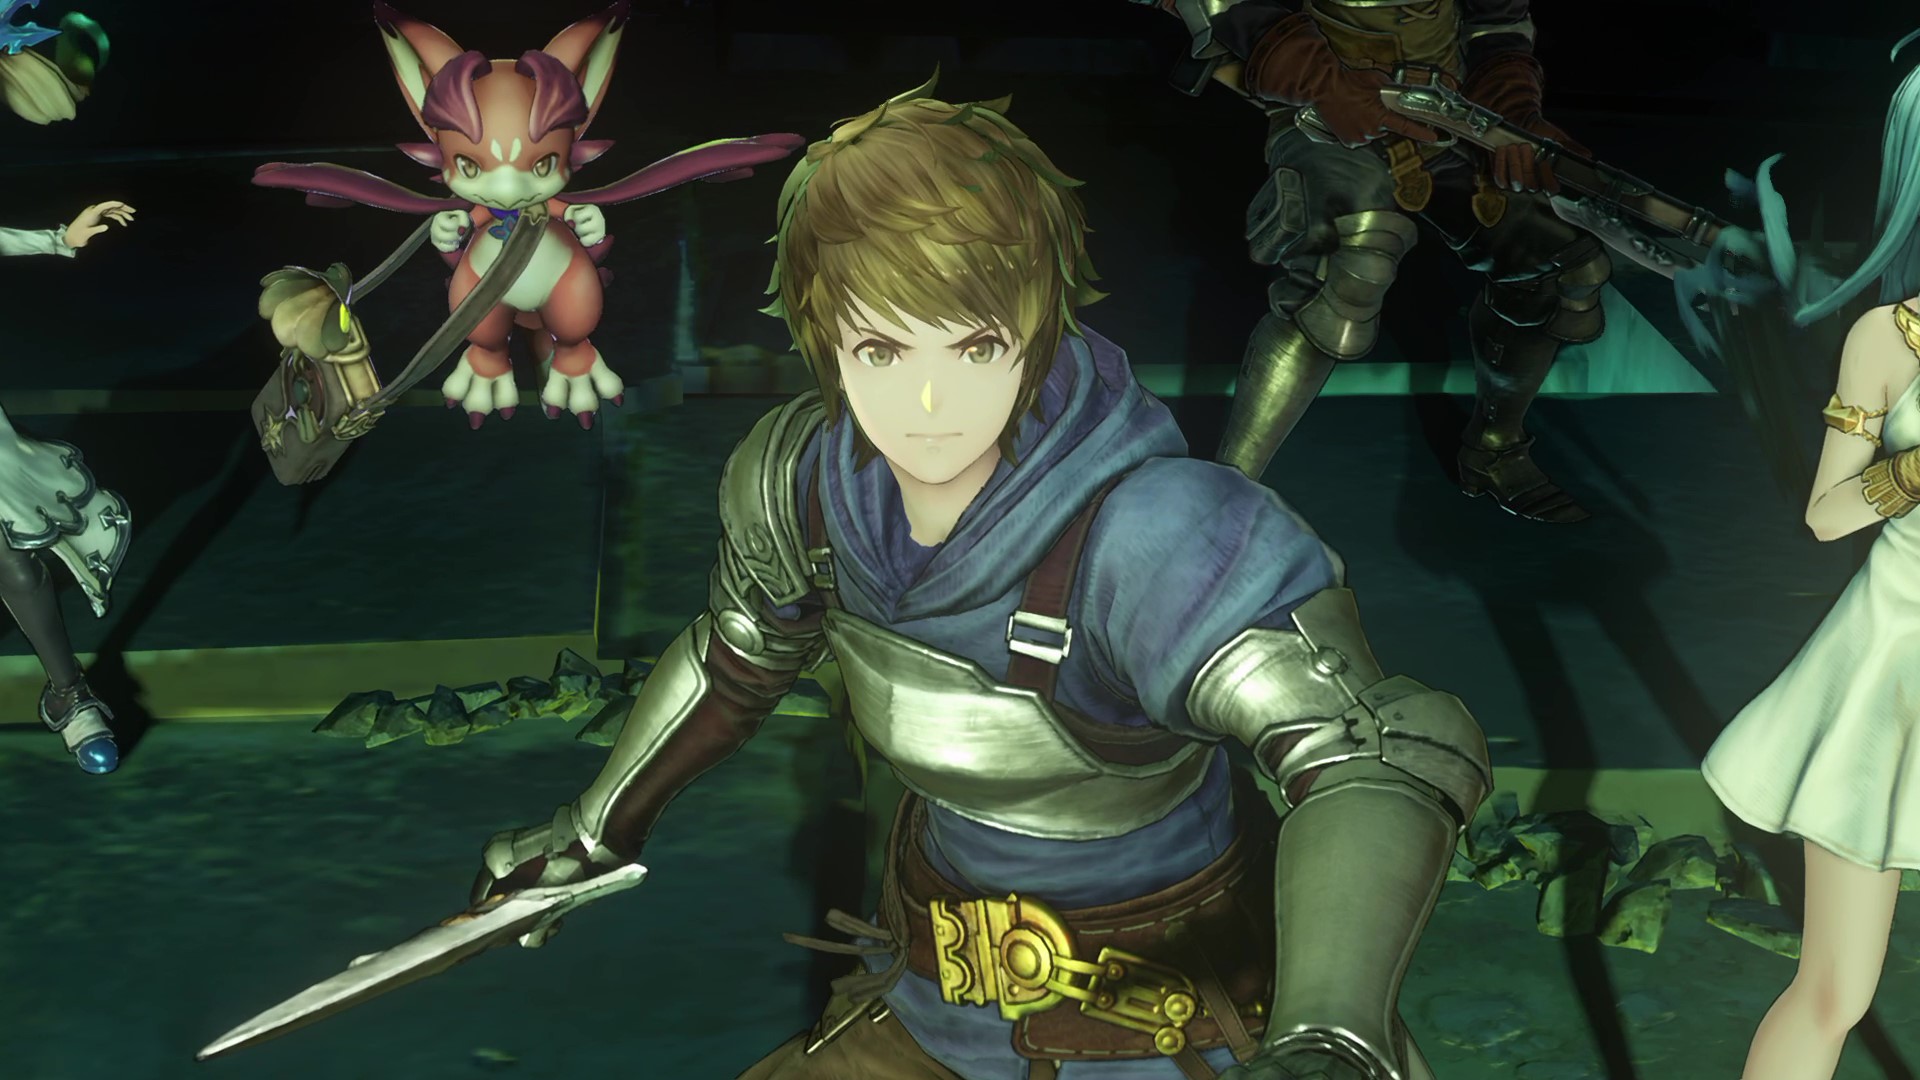 Granblue Fantasy: Relink is RPG multiplayer done right